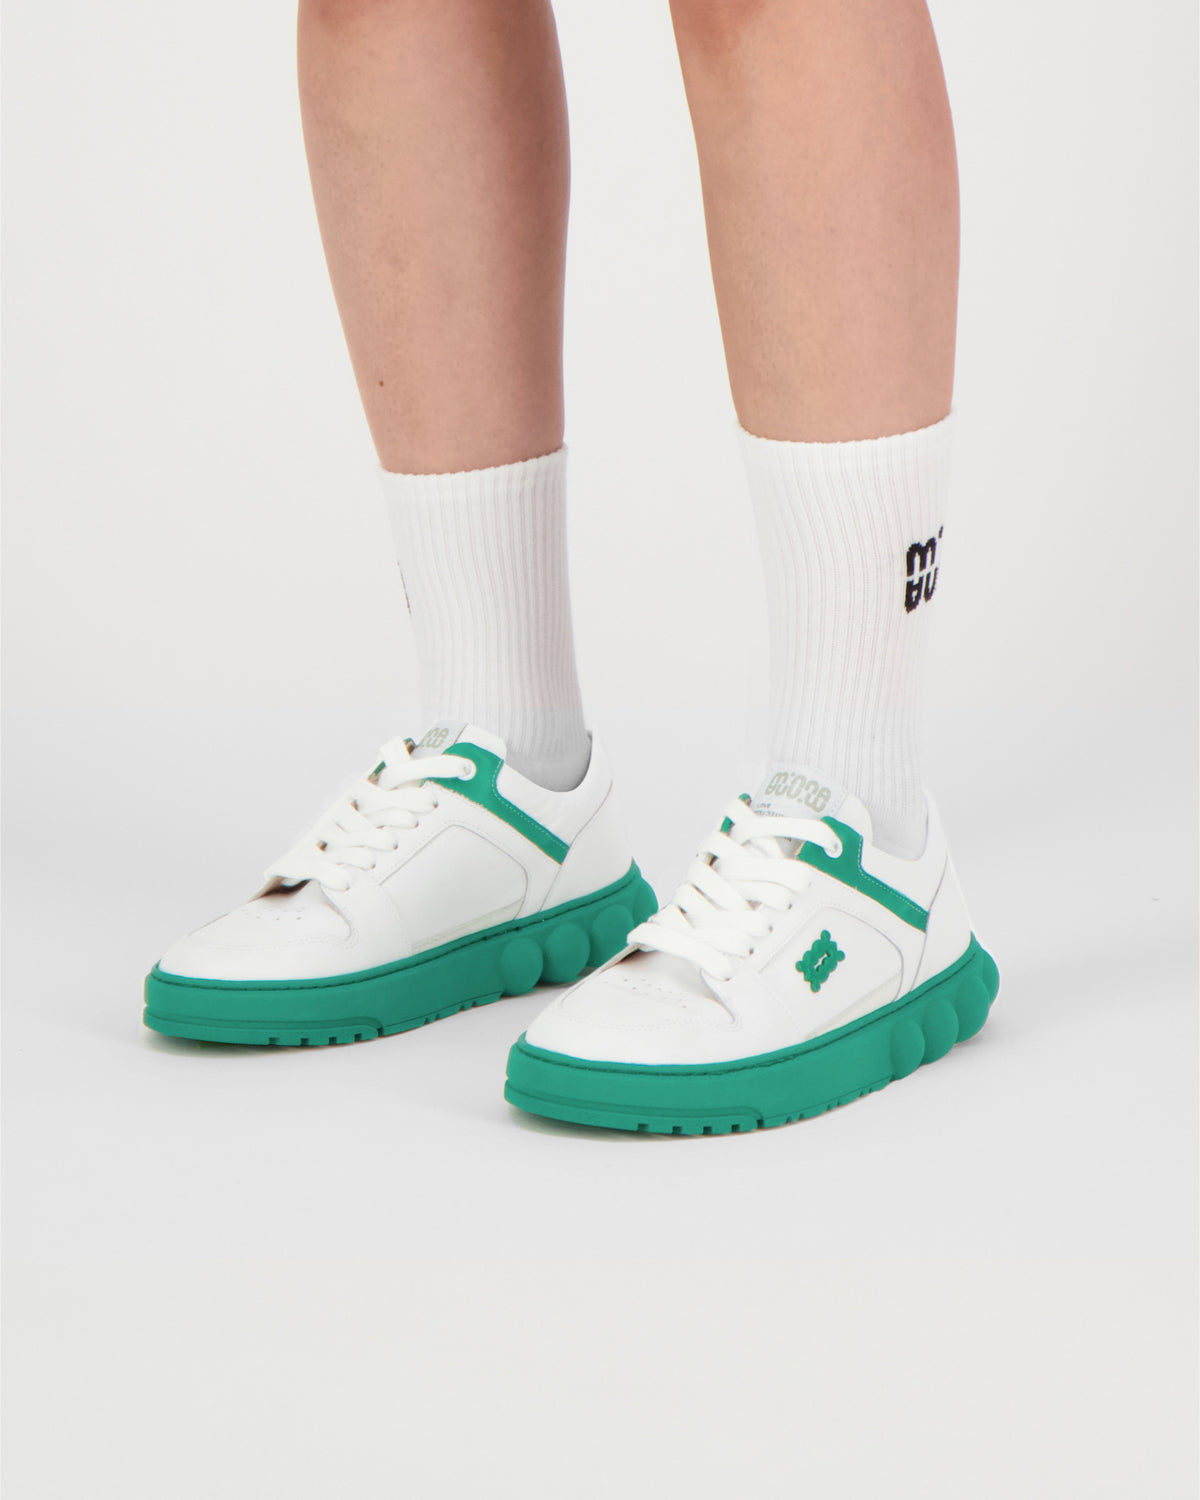 Oyster Emerald/White Leather